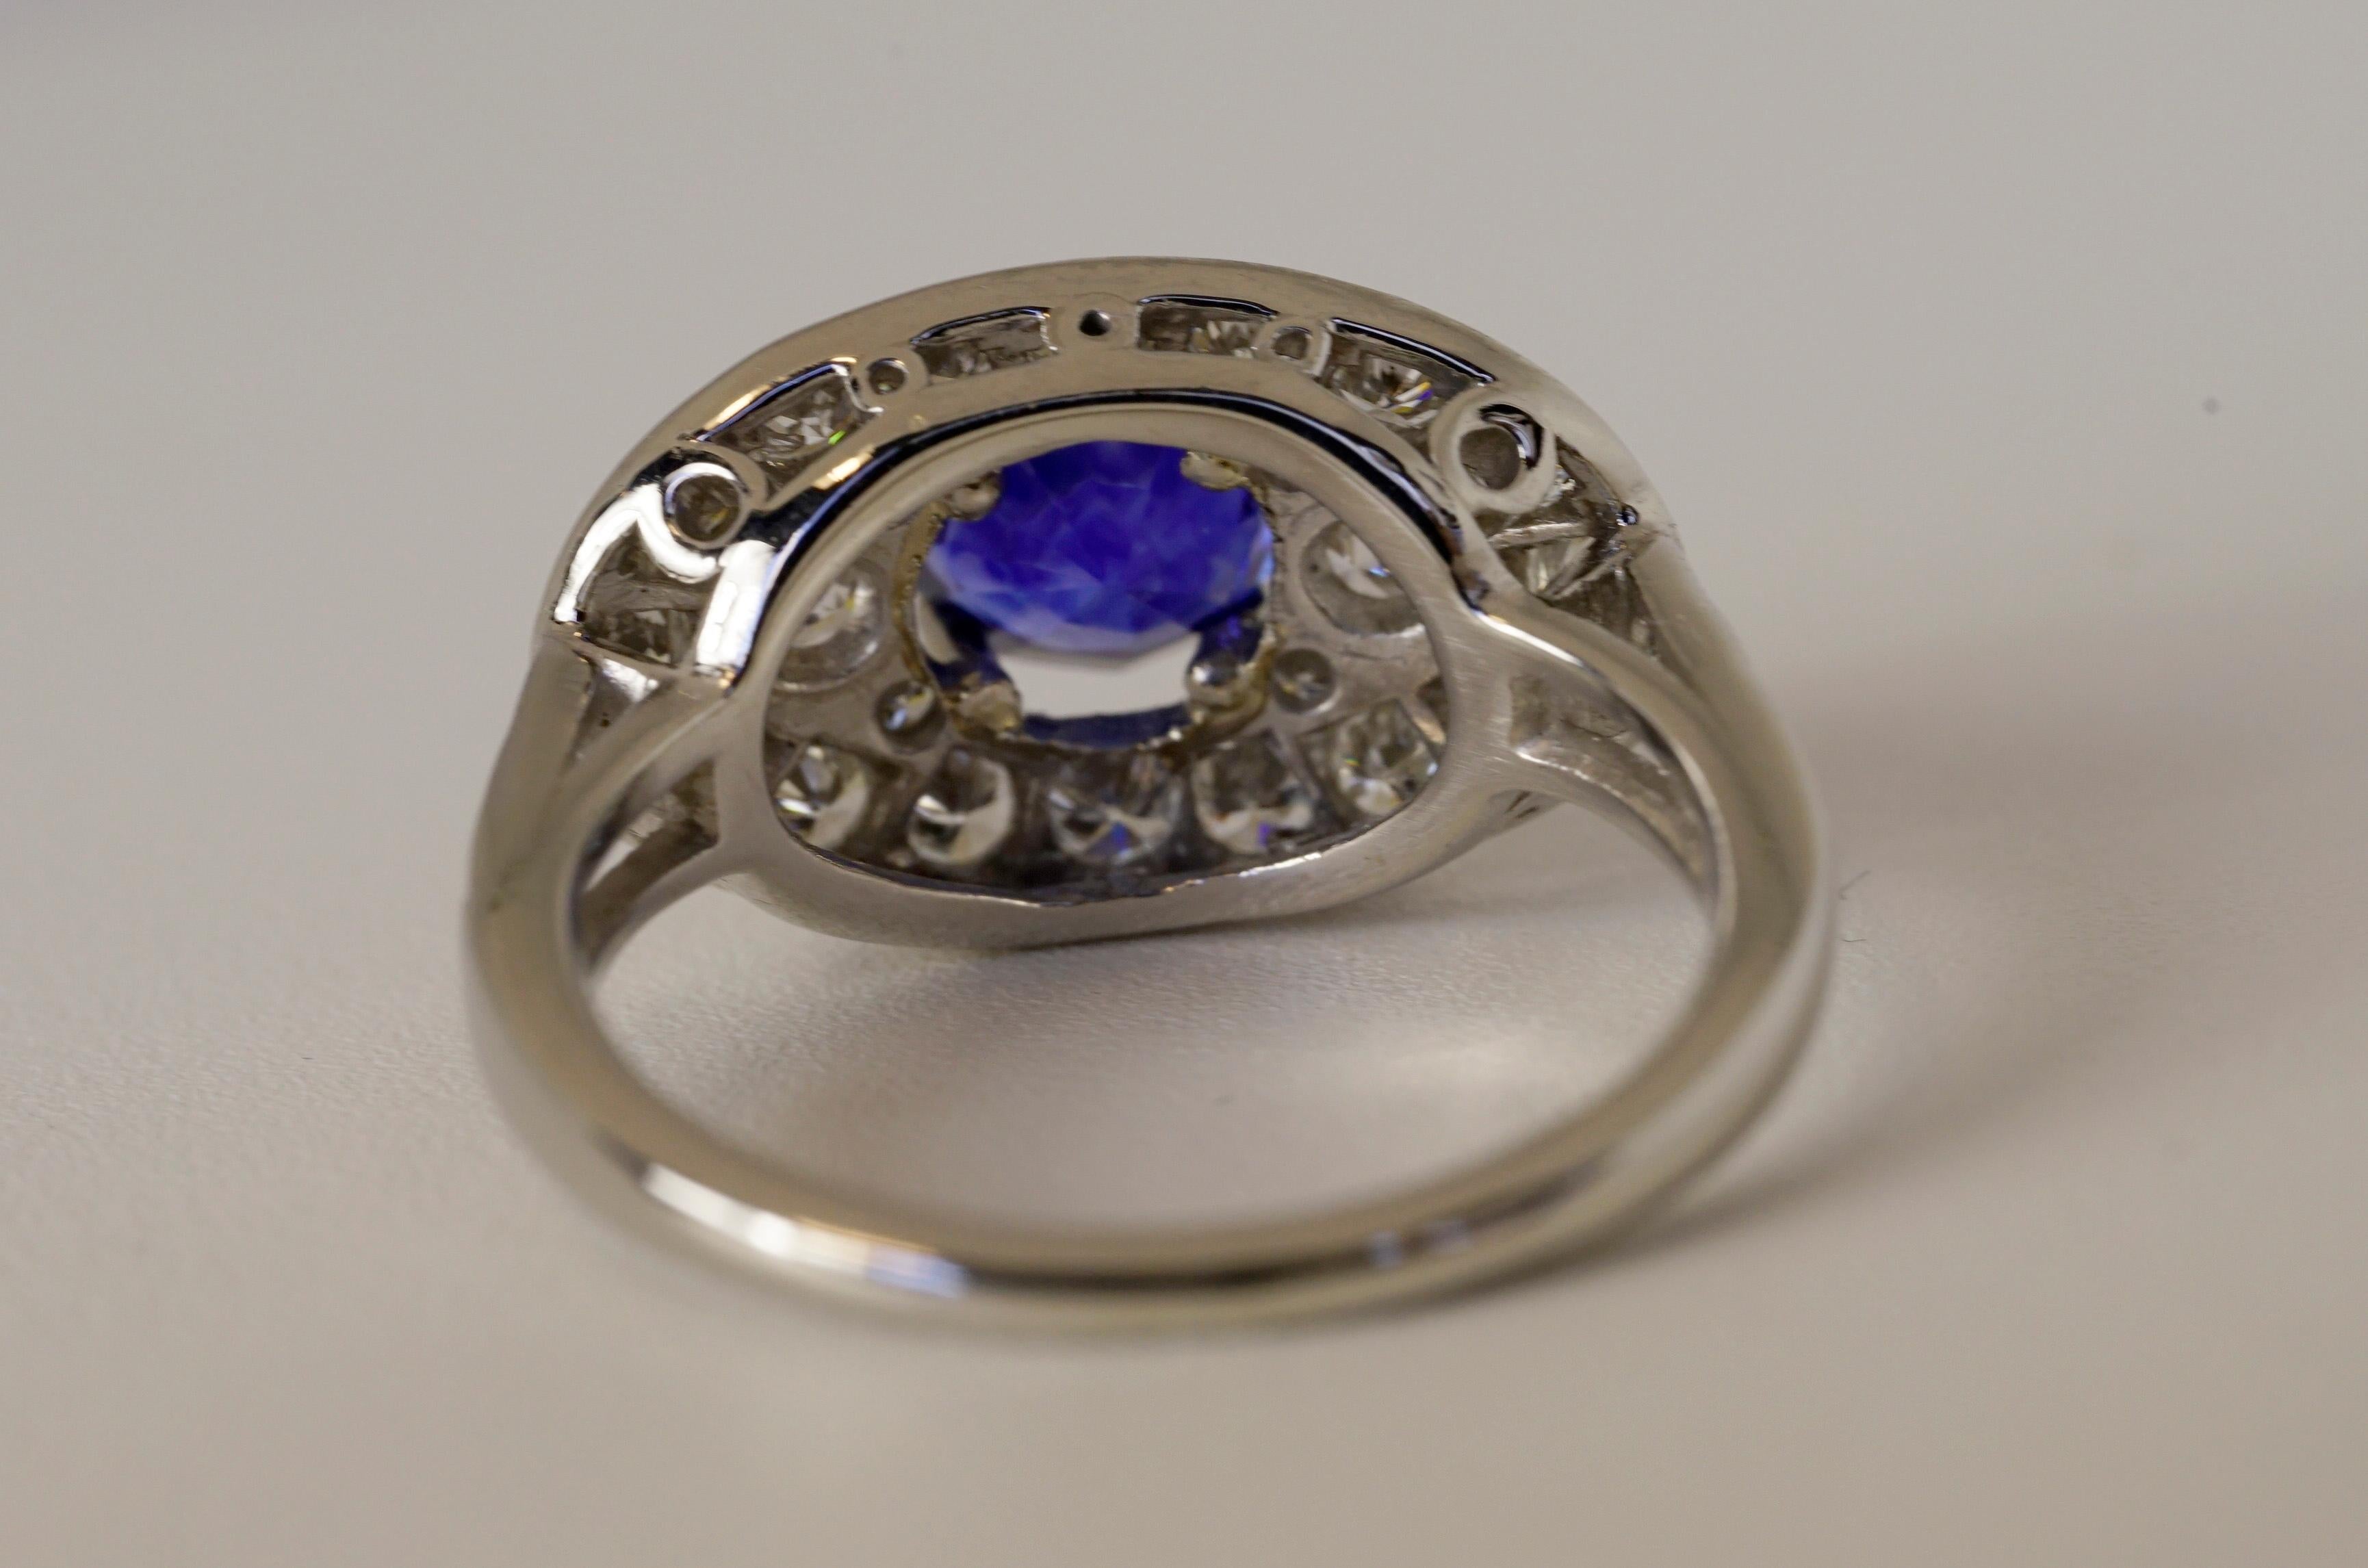 Round Shape Natural Ceylon Sapphire weight 1.57 carats, set in a Platinum ring with pave round brilliant cut diamonds (F VS) weighing 1.00 carat total.
2.57 carats total weight ,Size 7 .